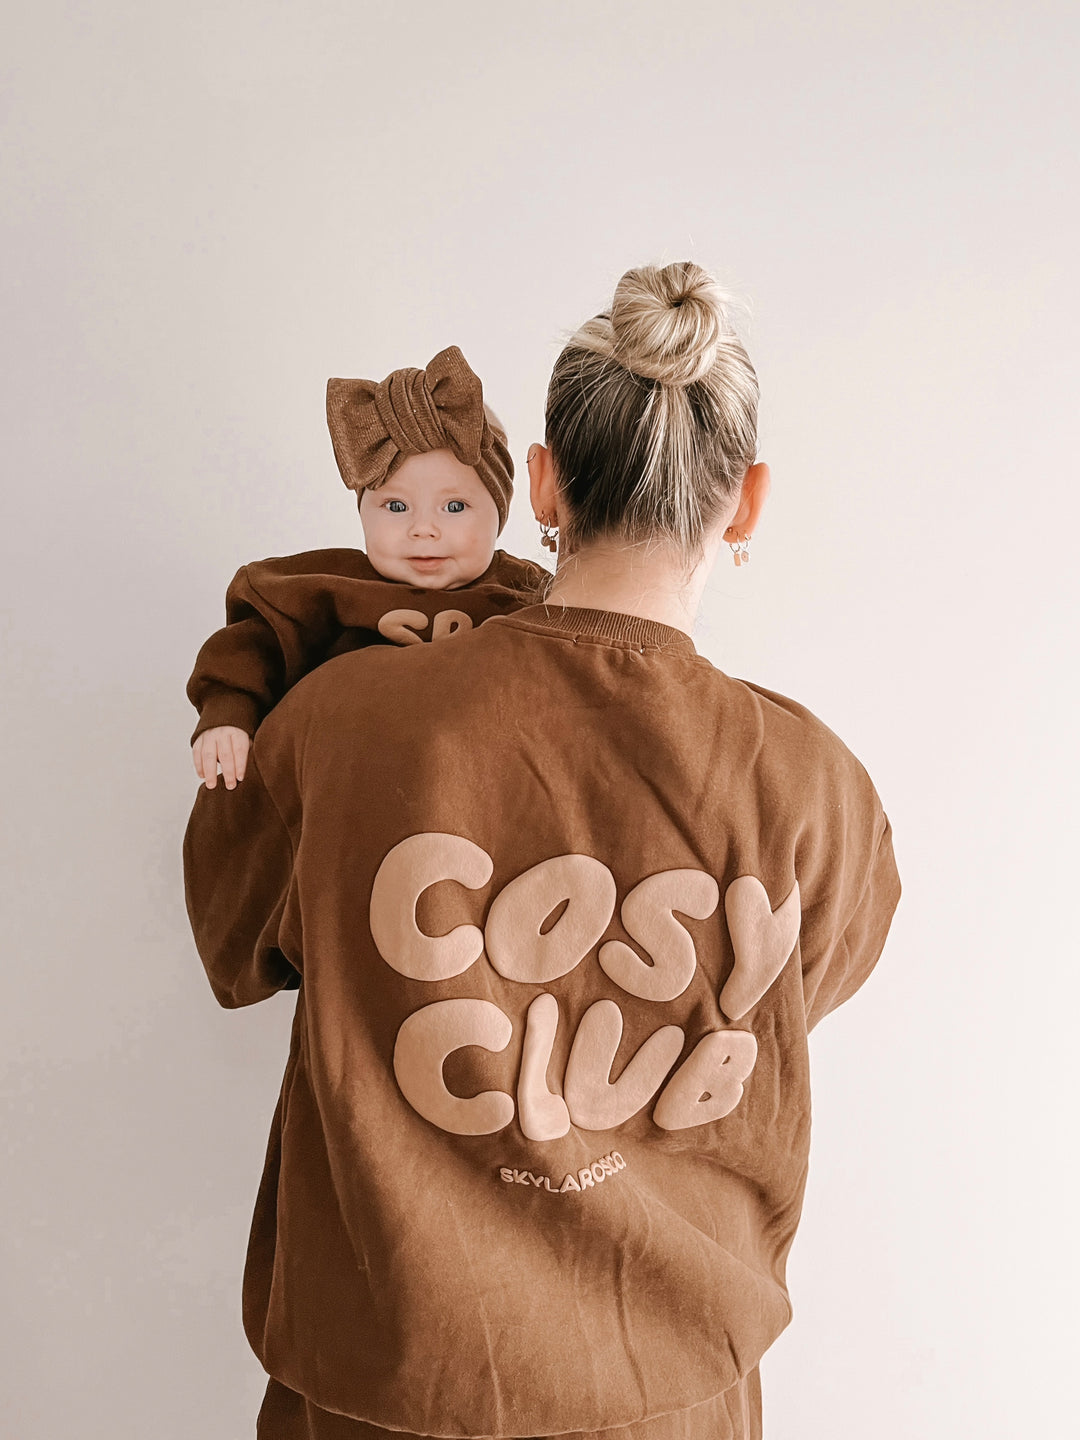 Cosy Club Adults Sweater - Chocolate Brown